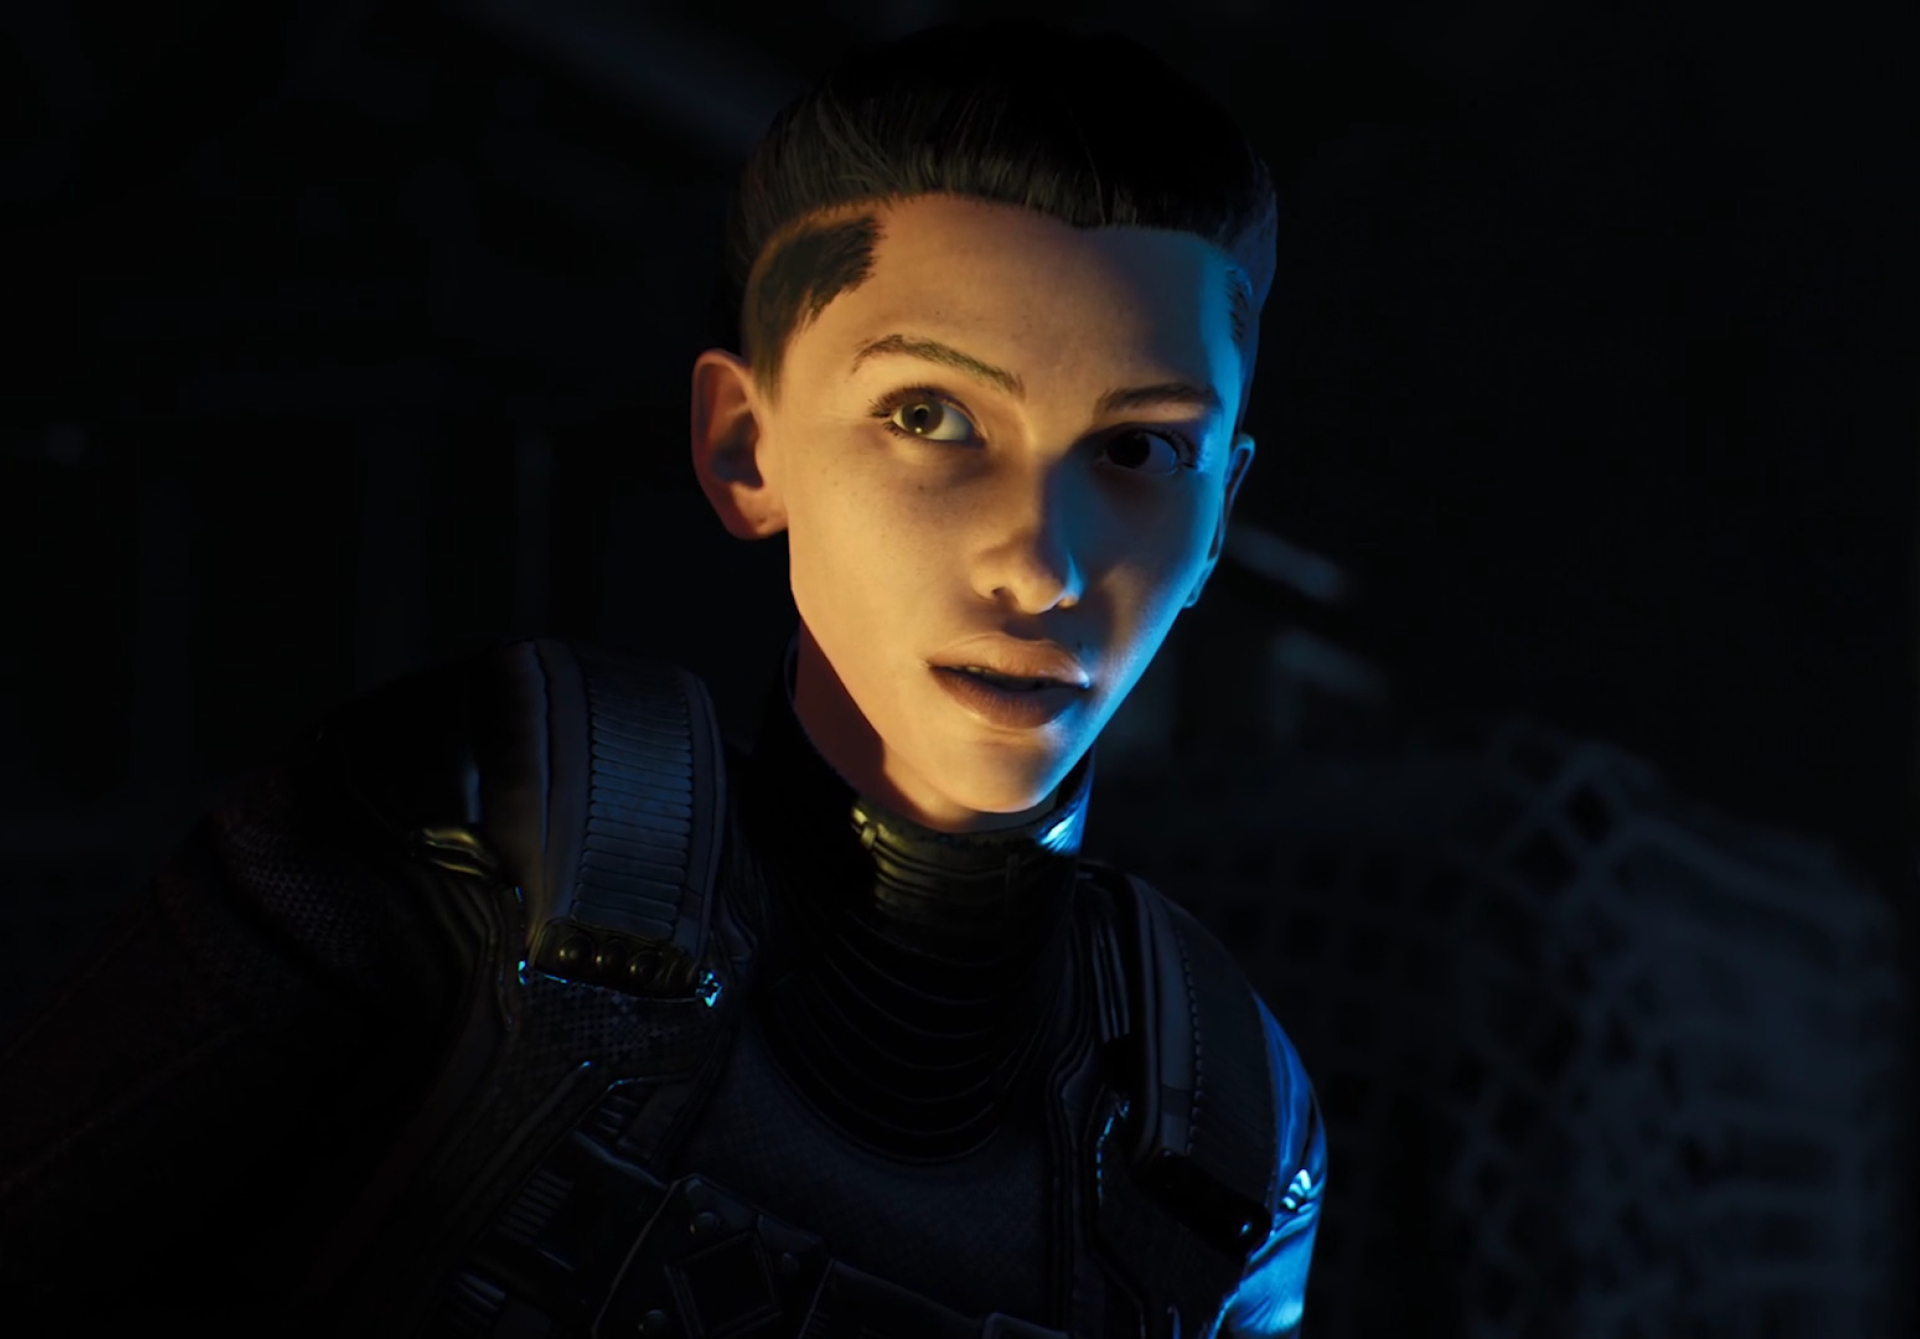 download the expanse a telltale series